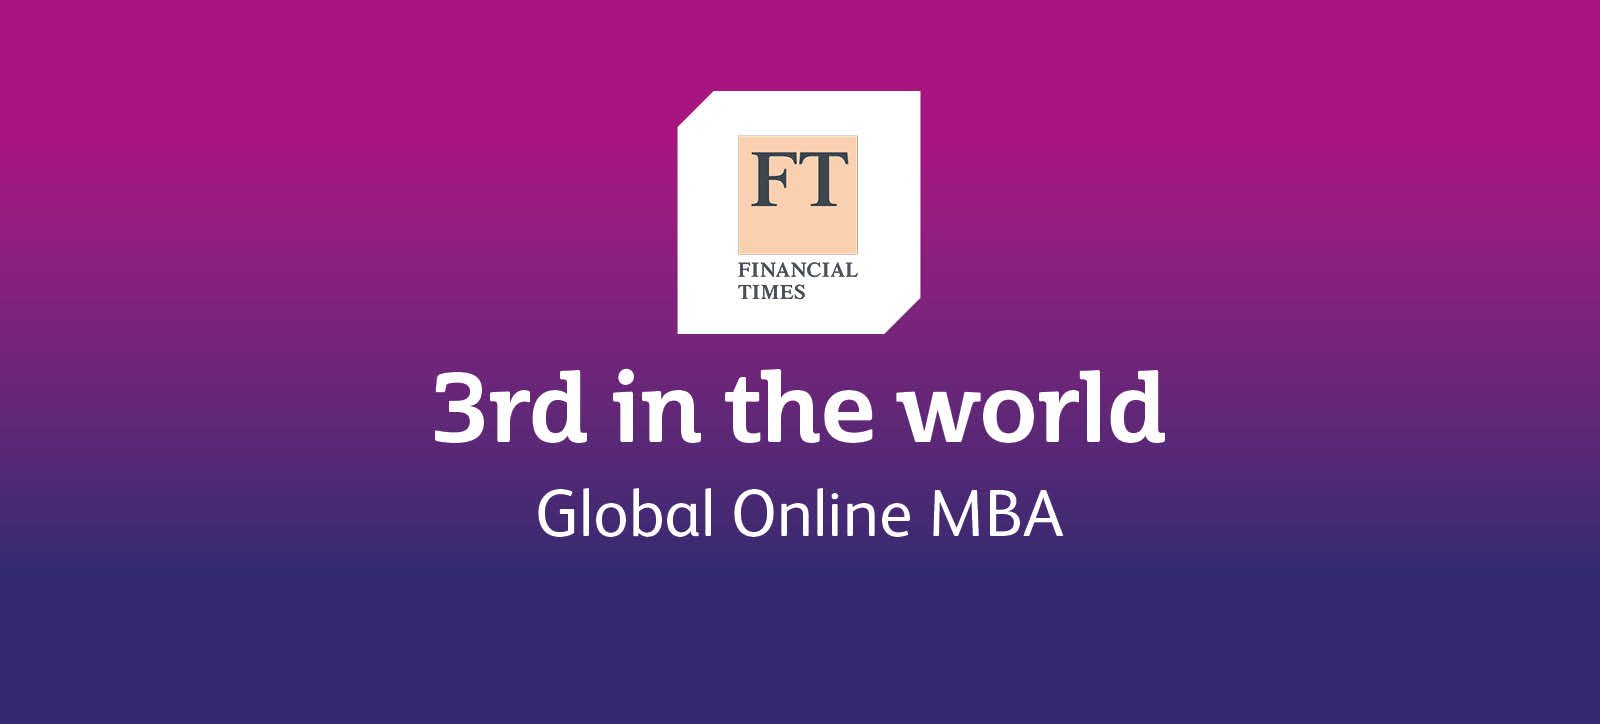 Warwick Business School ranked 3rd globally by the Financial Times